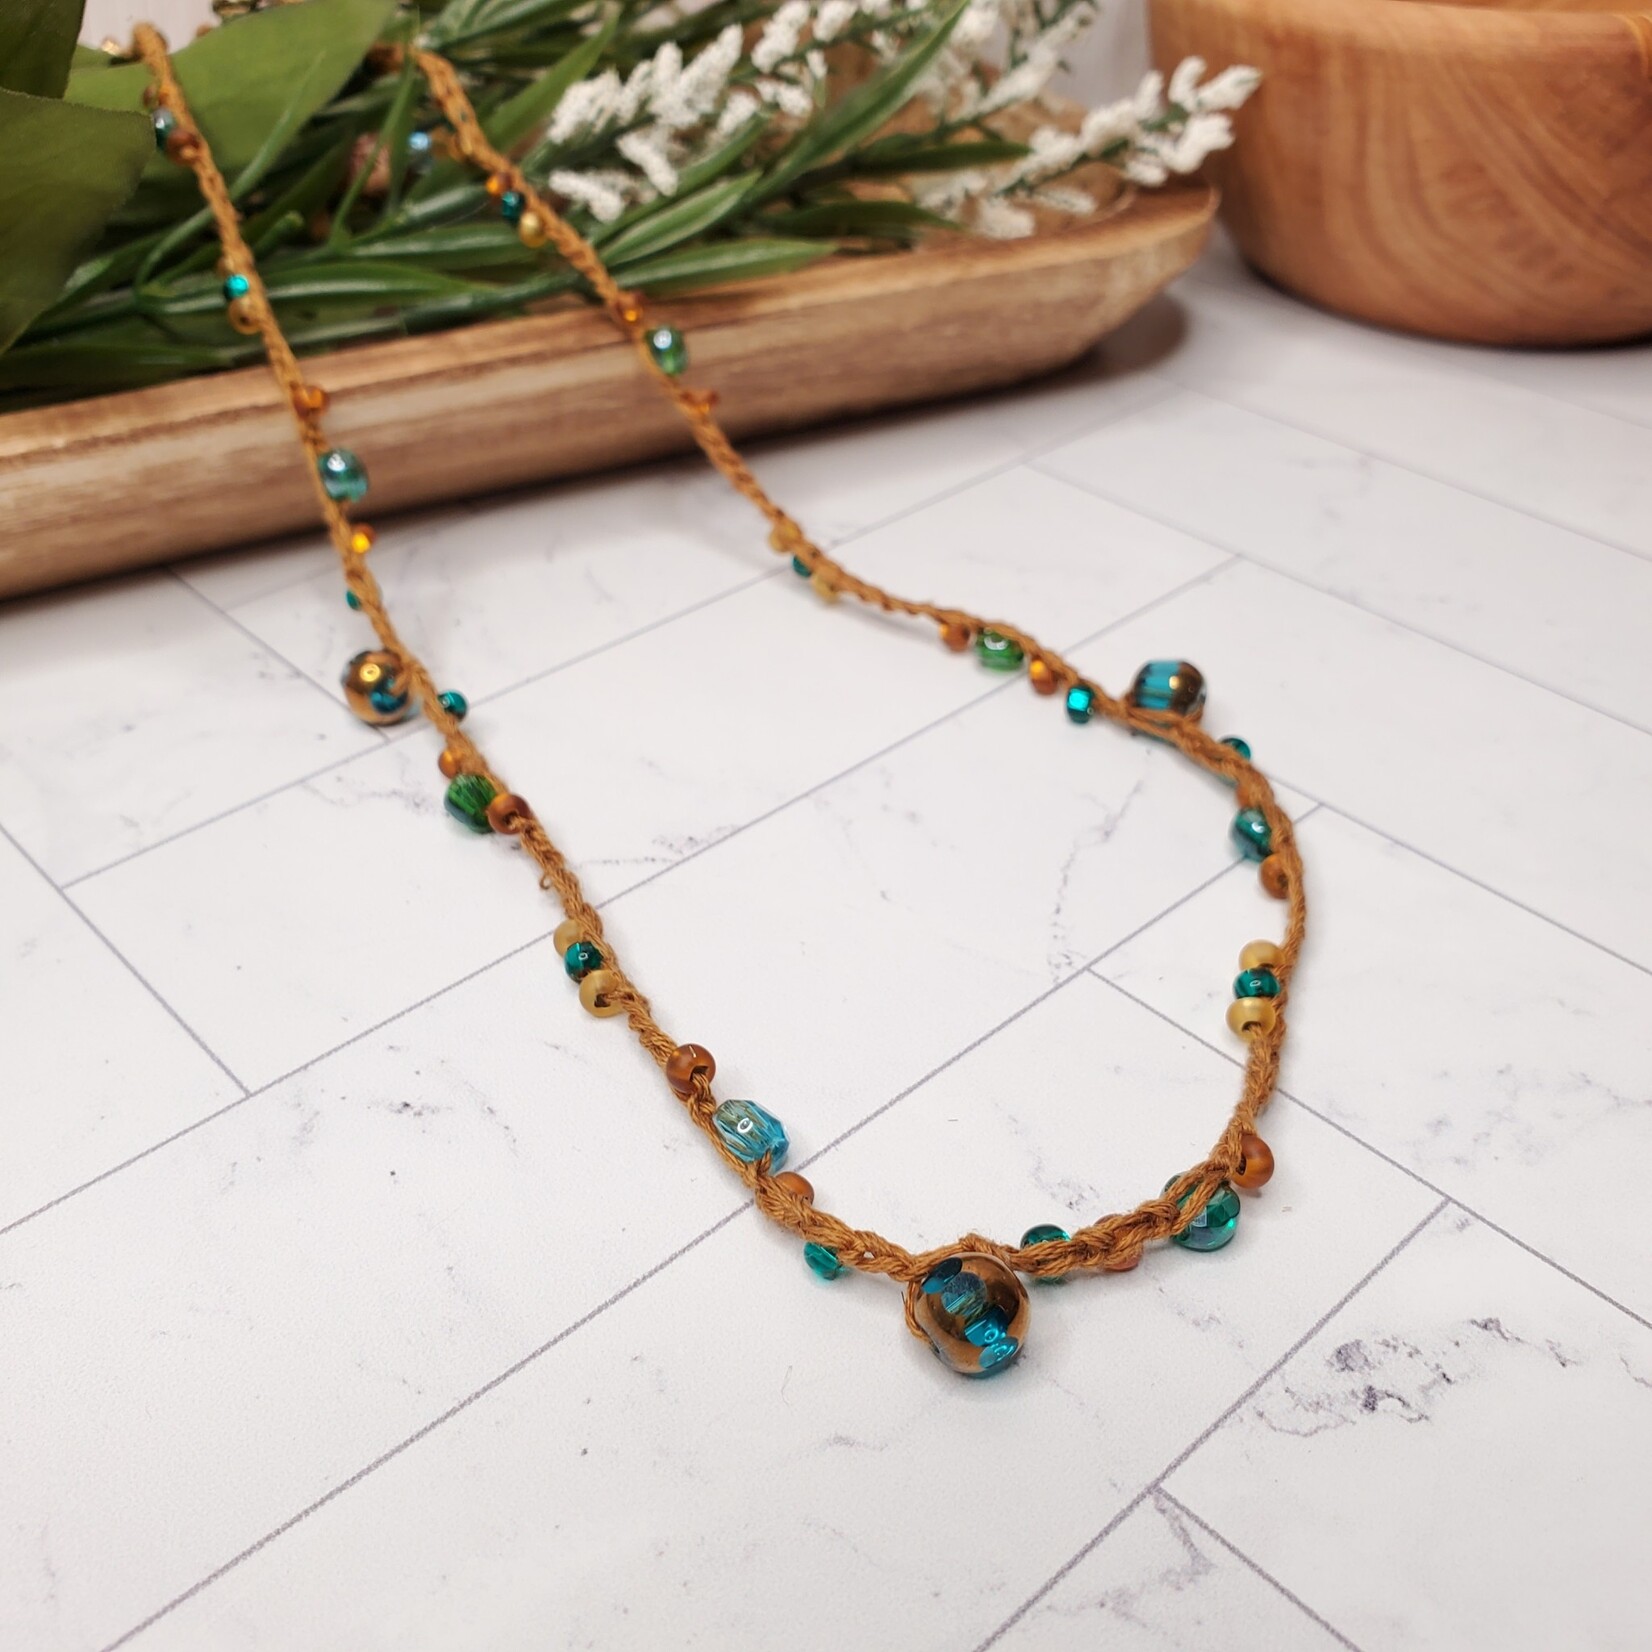 Crescent Moon Jewelry of the Sierras Bead Crochet Necklace - Turquoise & Copper - 22"